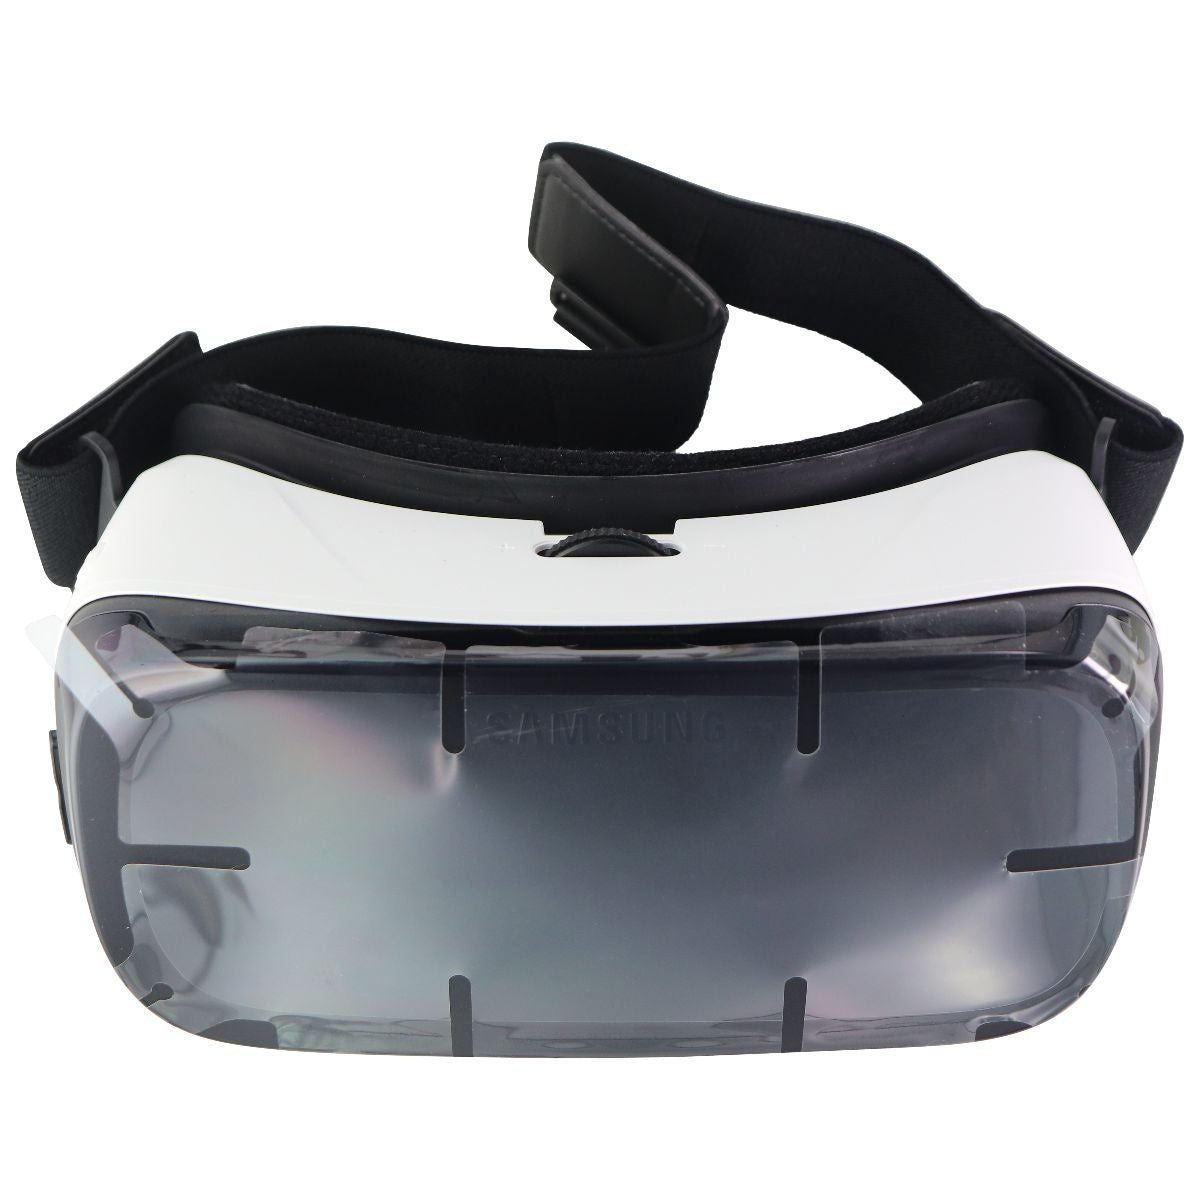 Samsung Gear VR (2015) Headset for Note5 / S6 edge+ / S6 / S7 / S7 Edge - White Virtual Reality - Smartphone VR Headsets Samsung    - Simple Cell Bulk Wholesale Pricing - USA Seller